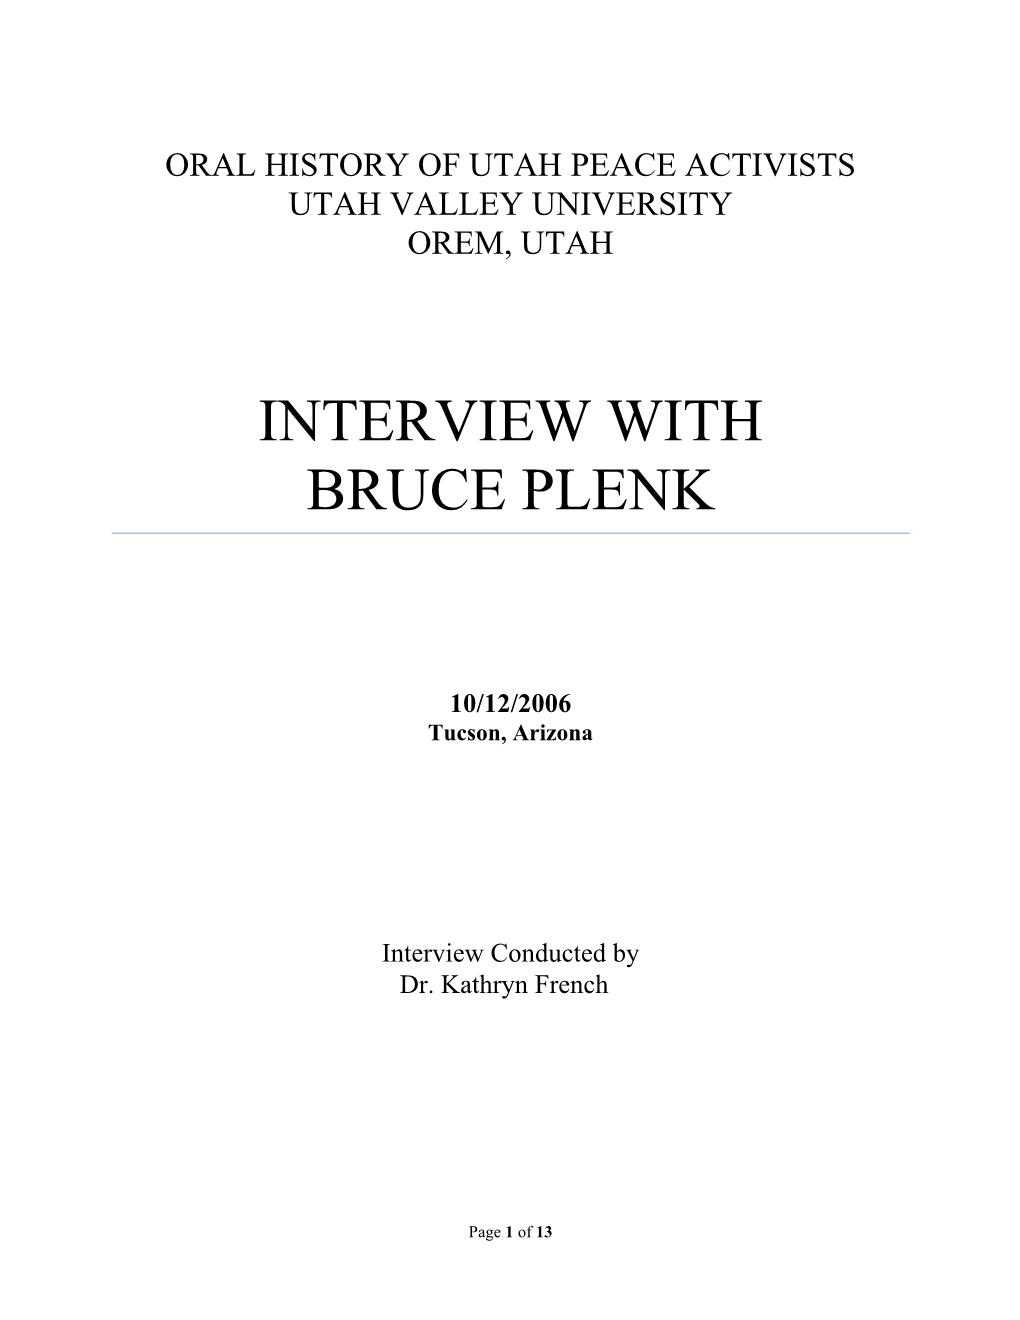 Interview with Bruce Plenk